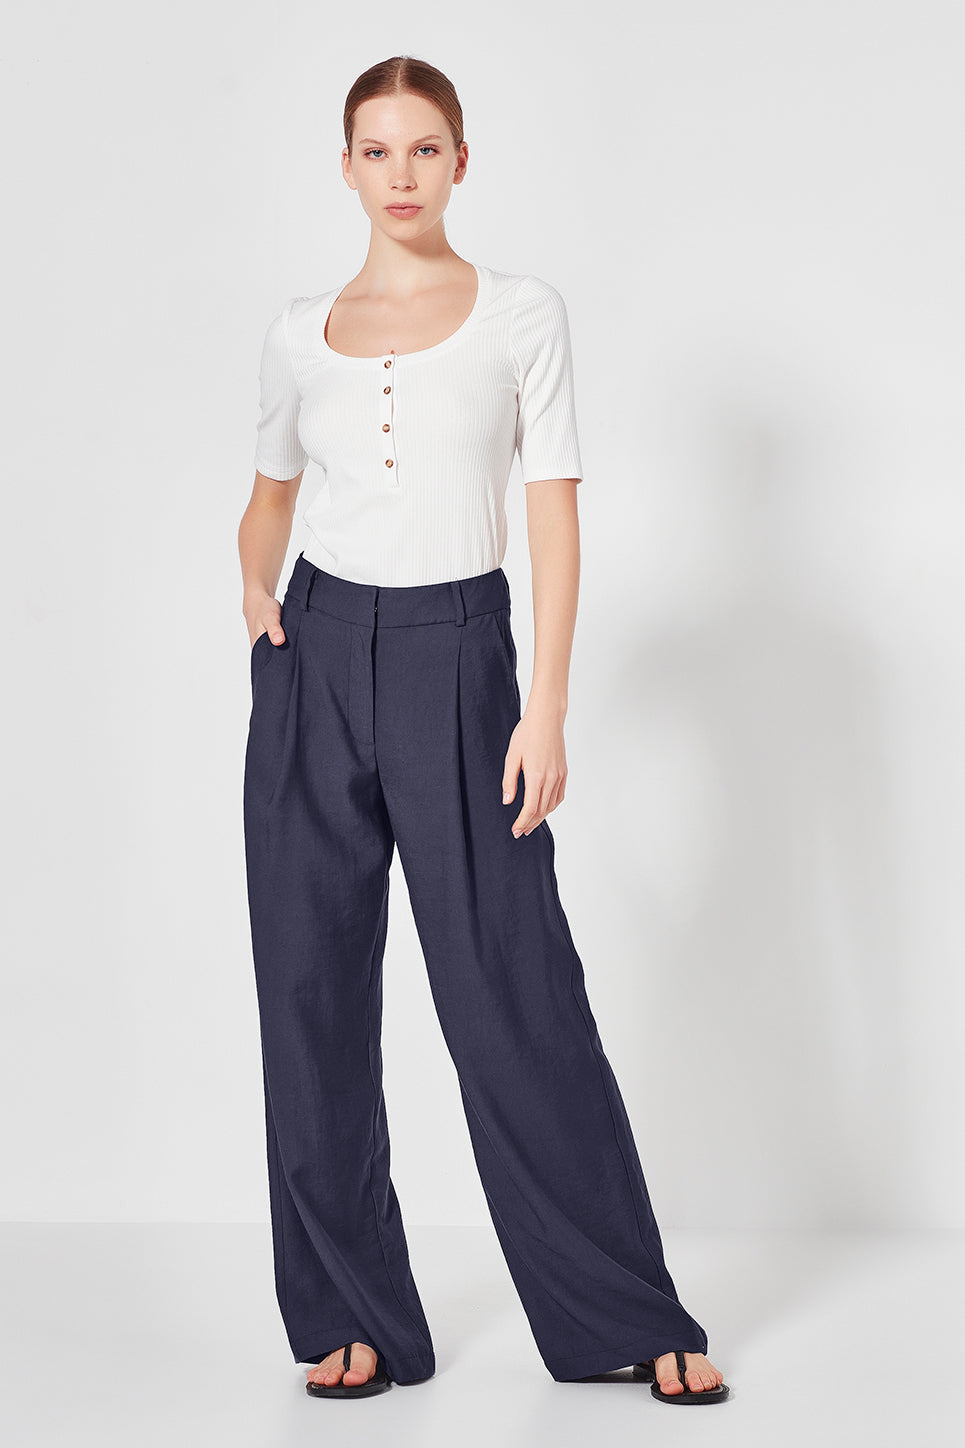 The Selbourne Trouser in Navy